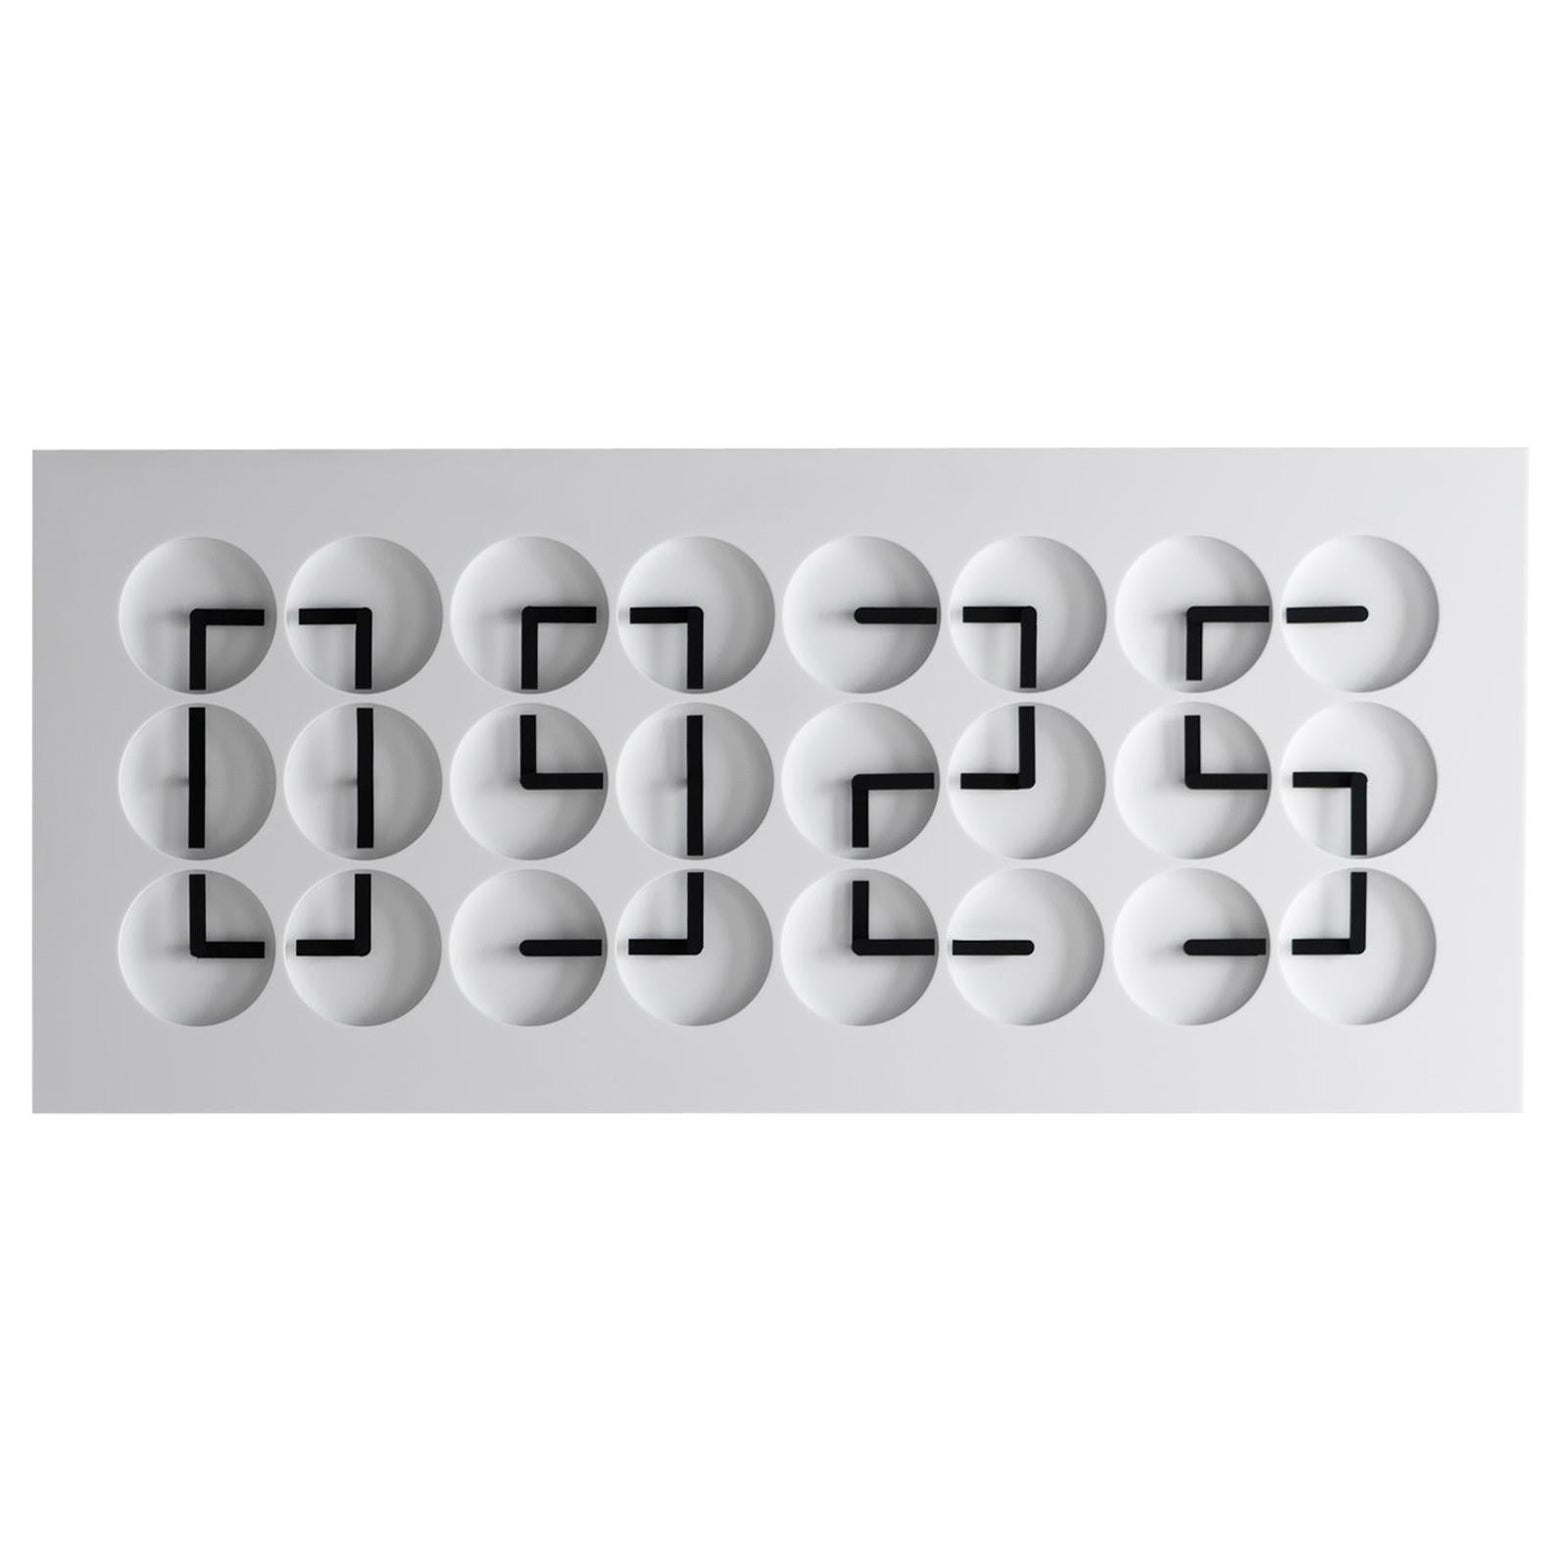 Clockclock 24 White by Humans since 1982, Wall Clock